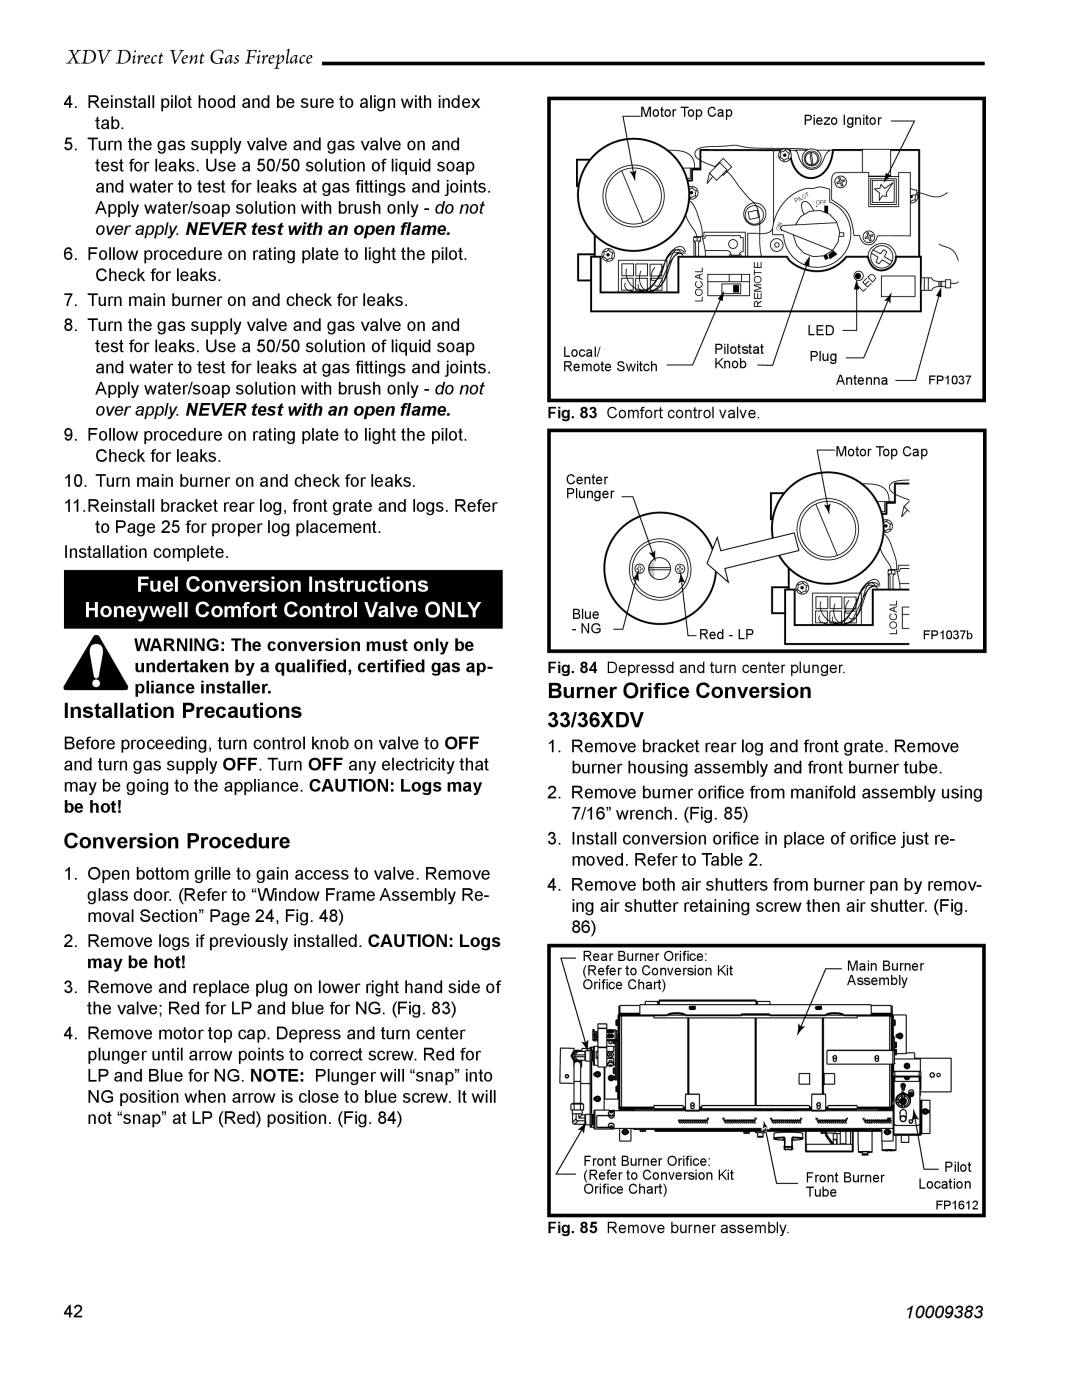 Vermont Casting 36XDV Fuel Conversion Instructions, Honeywell Comfort Control Valve ONLY, XDV Direct Vent Gas Fireplace 